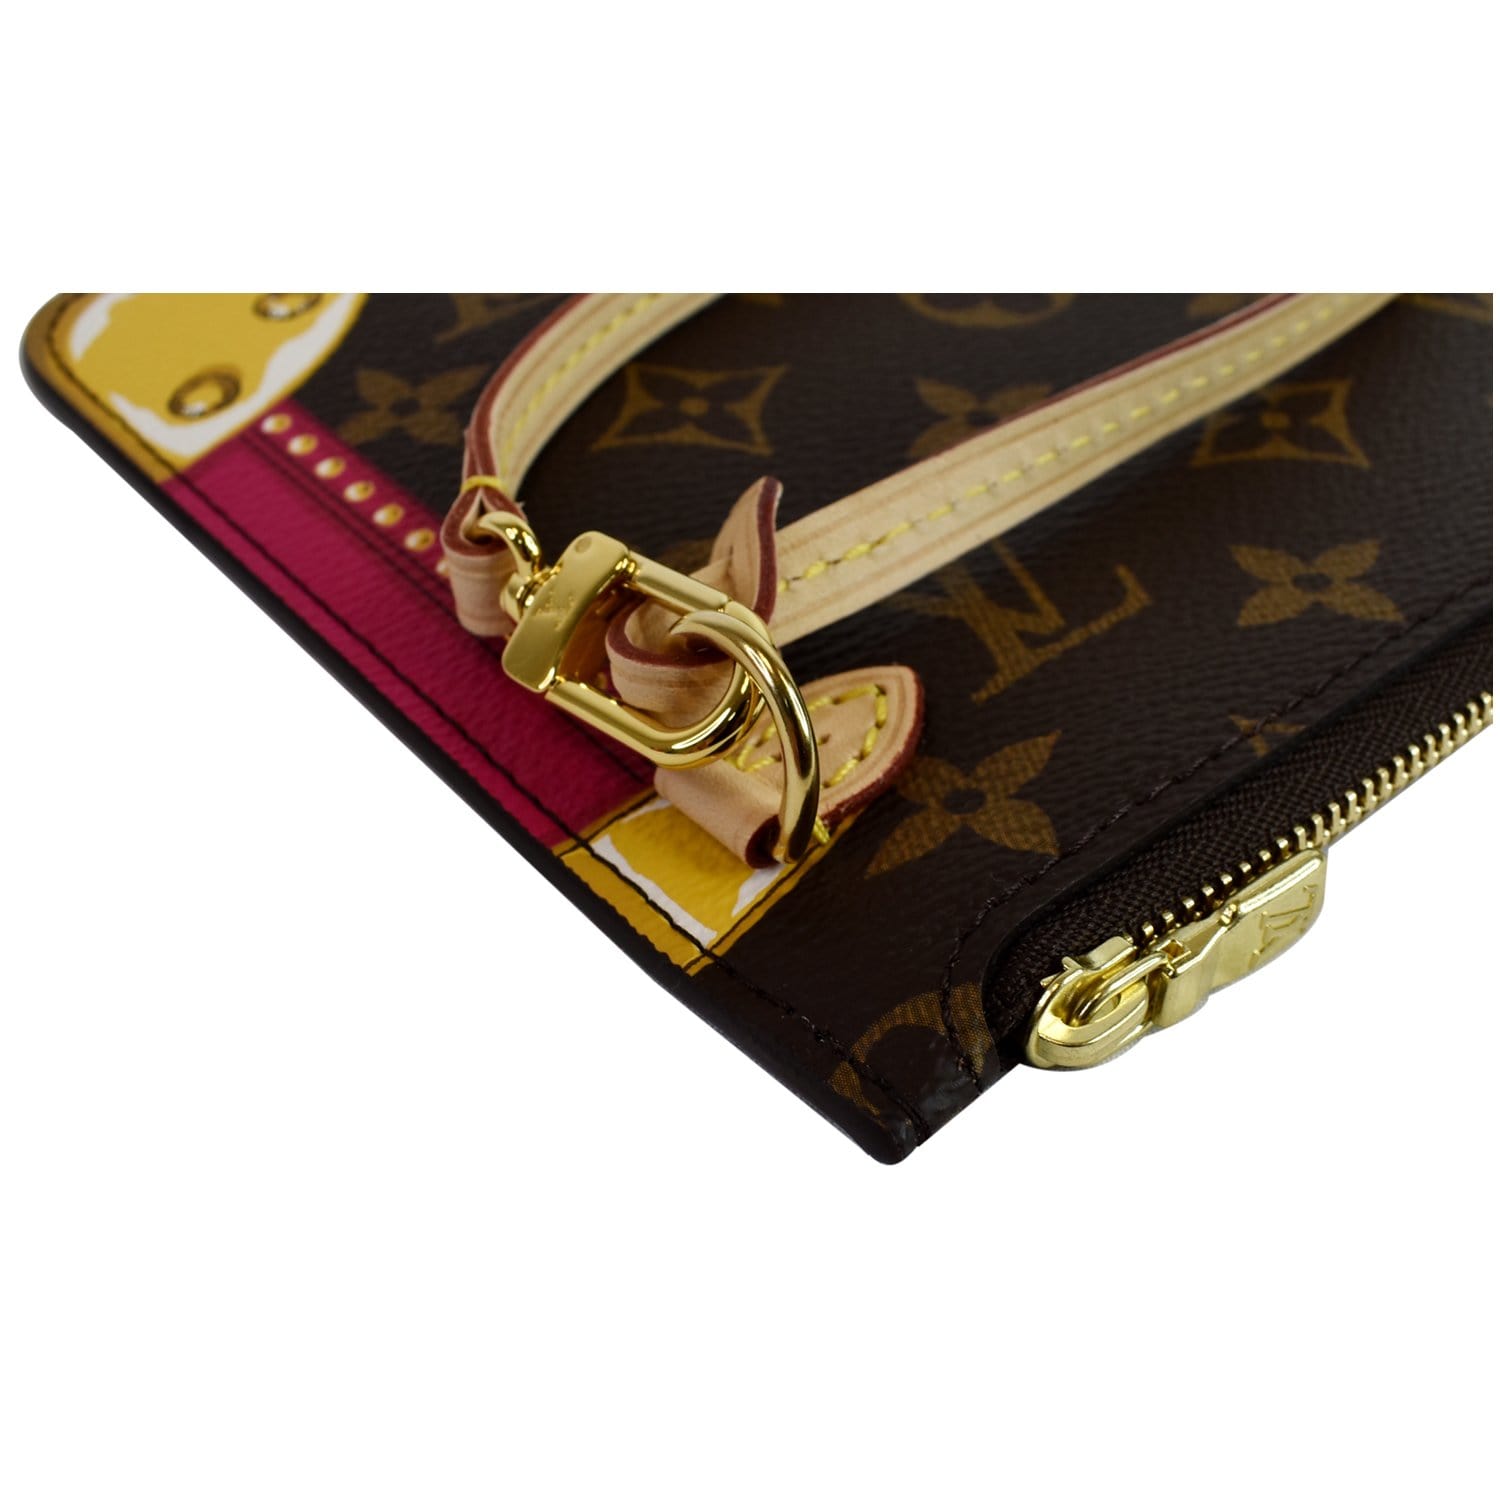 Louis Vuitton Monogram Summer Trunks Neo Neverfull MM w/ Pouch - Brown  Totes, Handbags - LOU750404